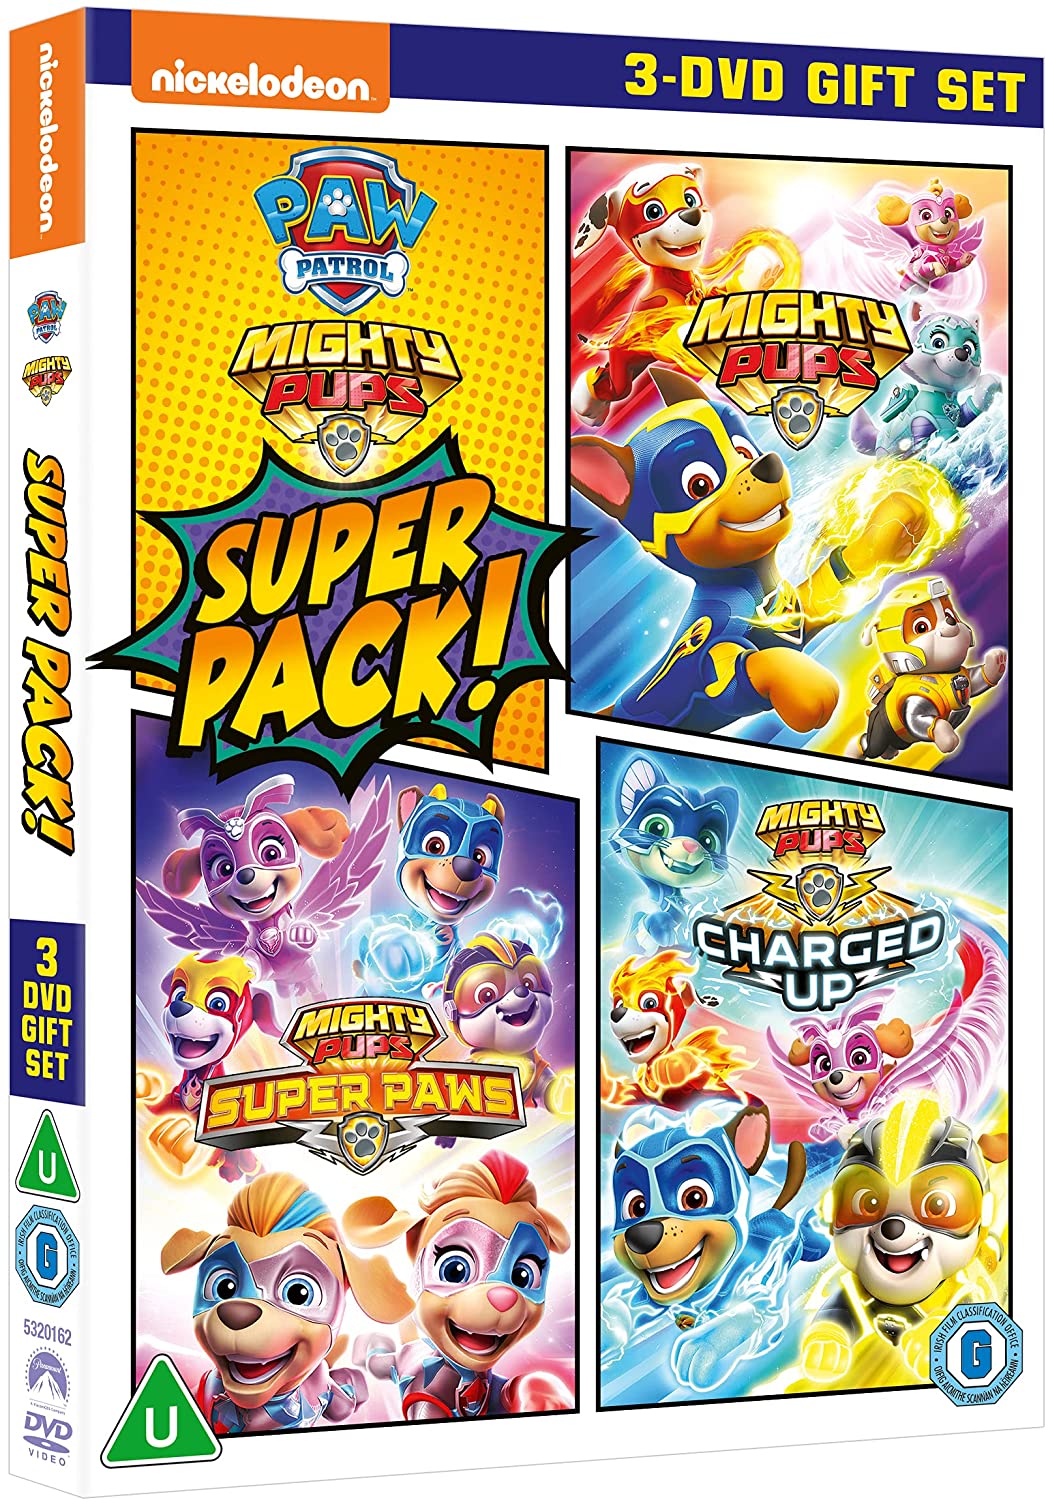 Paw Patrol - Mighty Pups Super Pack! [DVD]